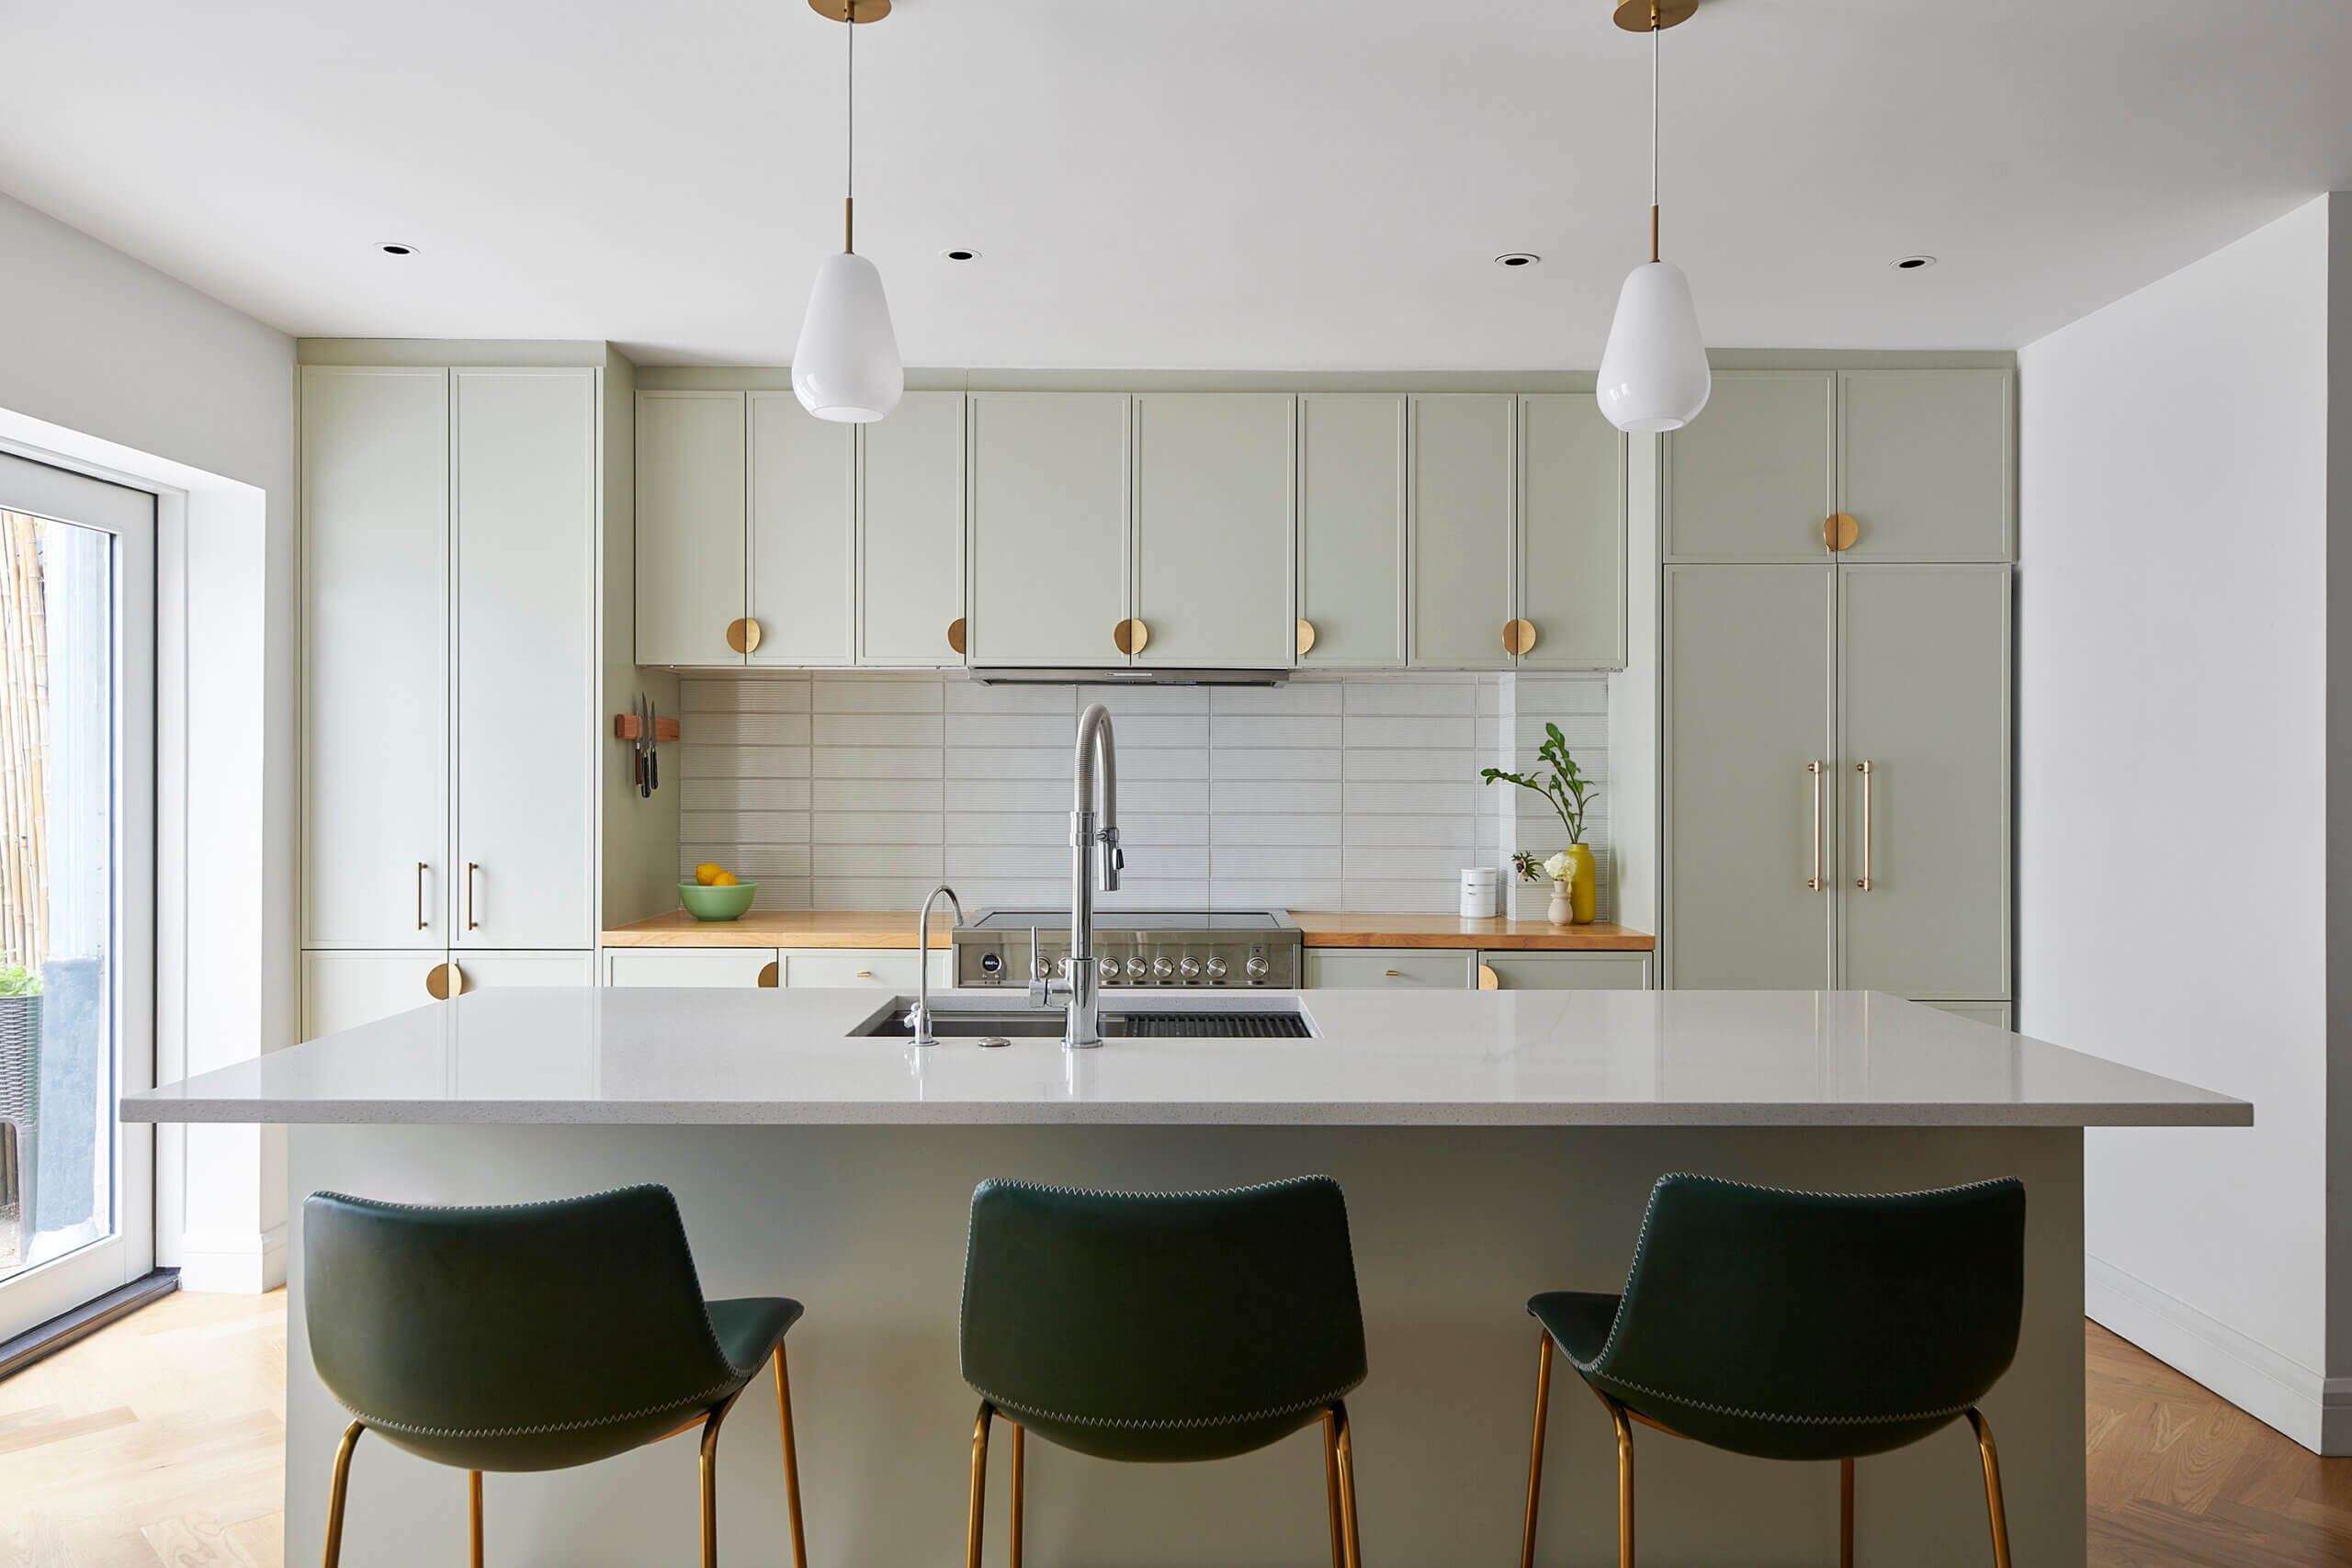 KITCHEN with a large island and pale green cabinets